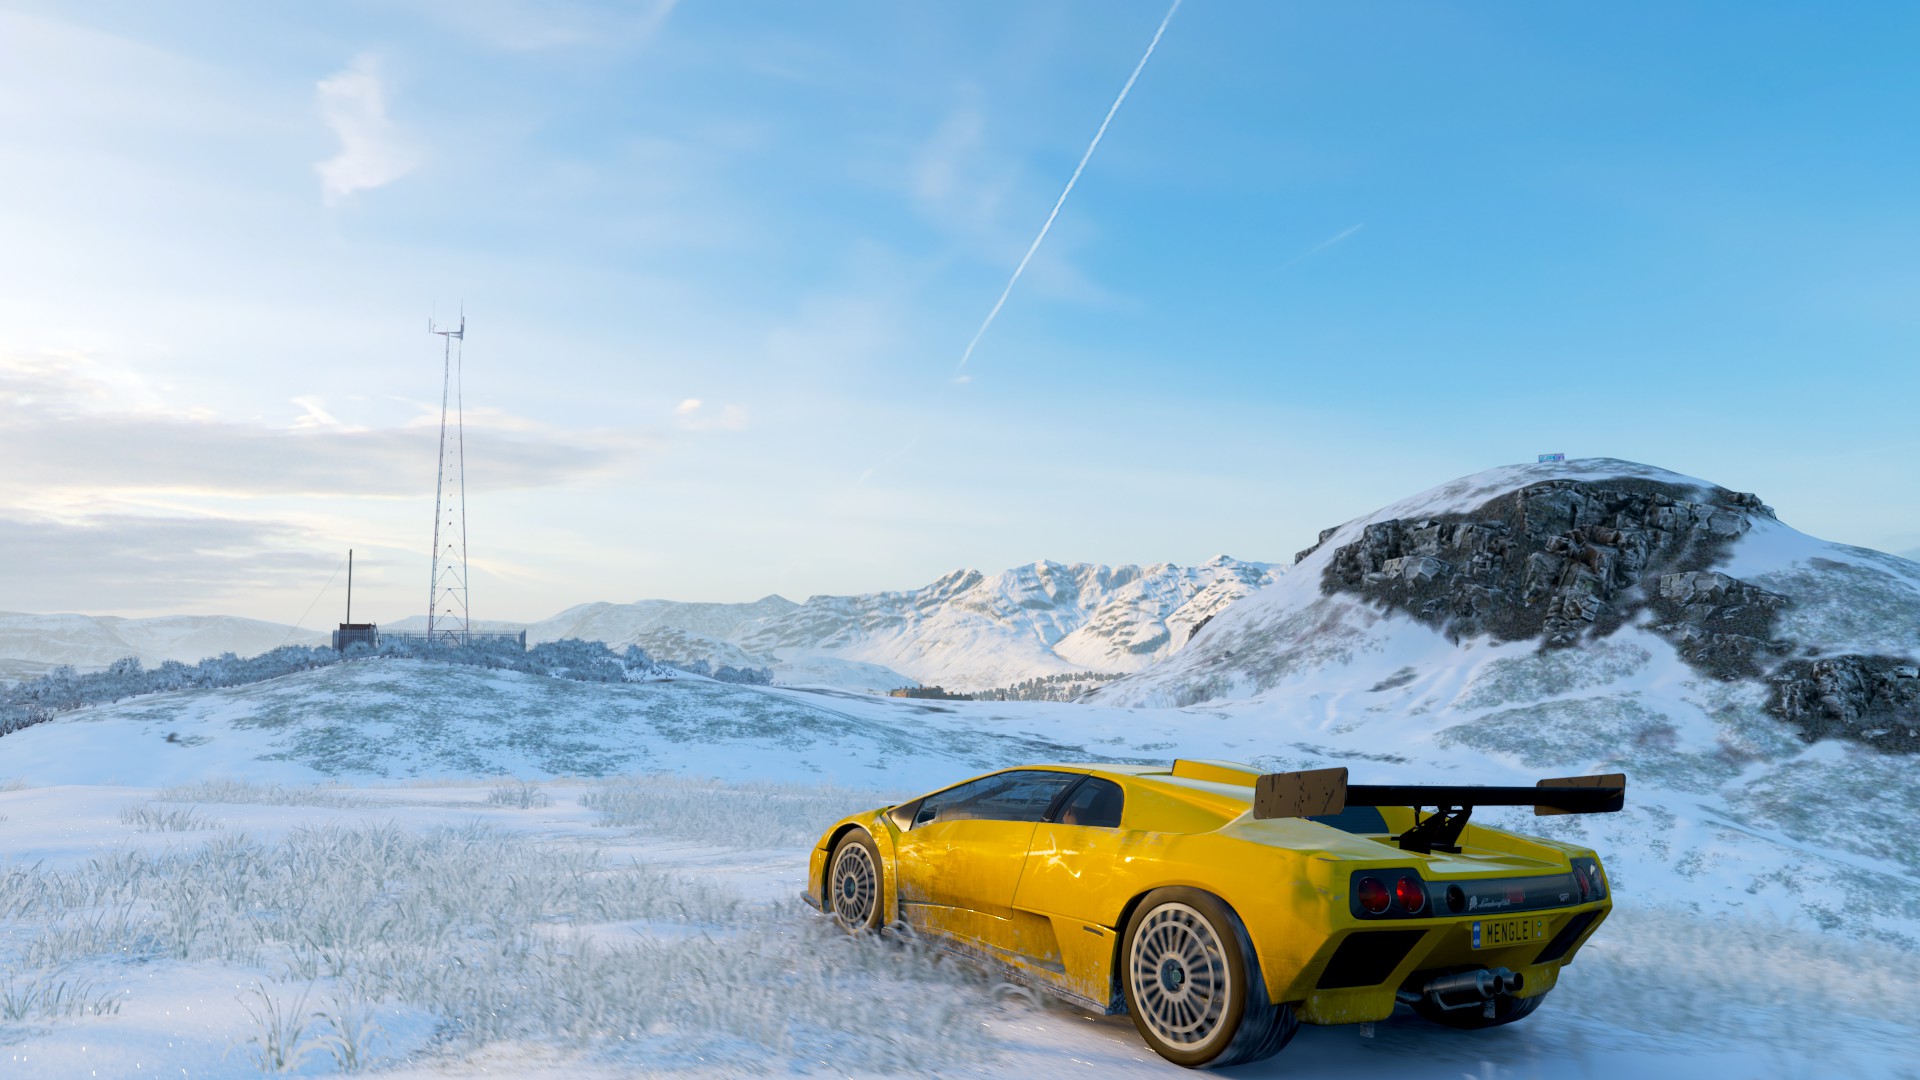 General 1920x1080 Forza Horizon 4 landscape video games snow car vehicle sky clouds video game art side view licence plates CGI taillights